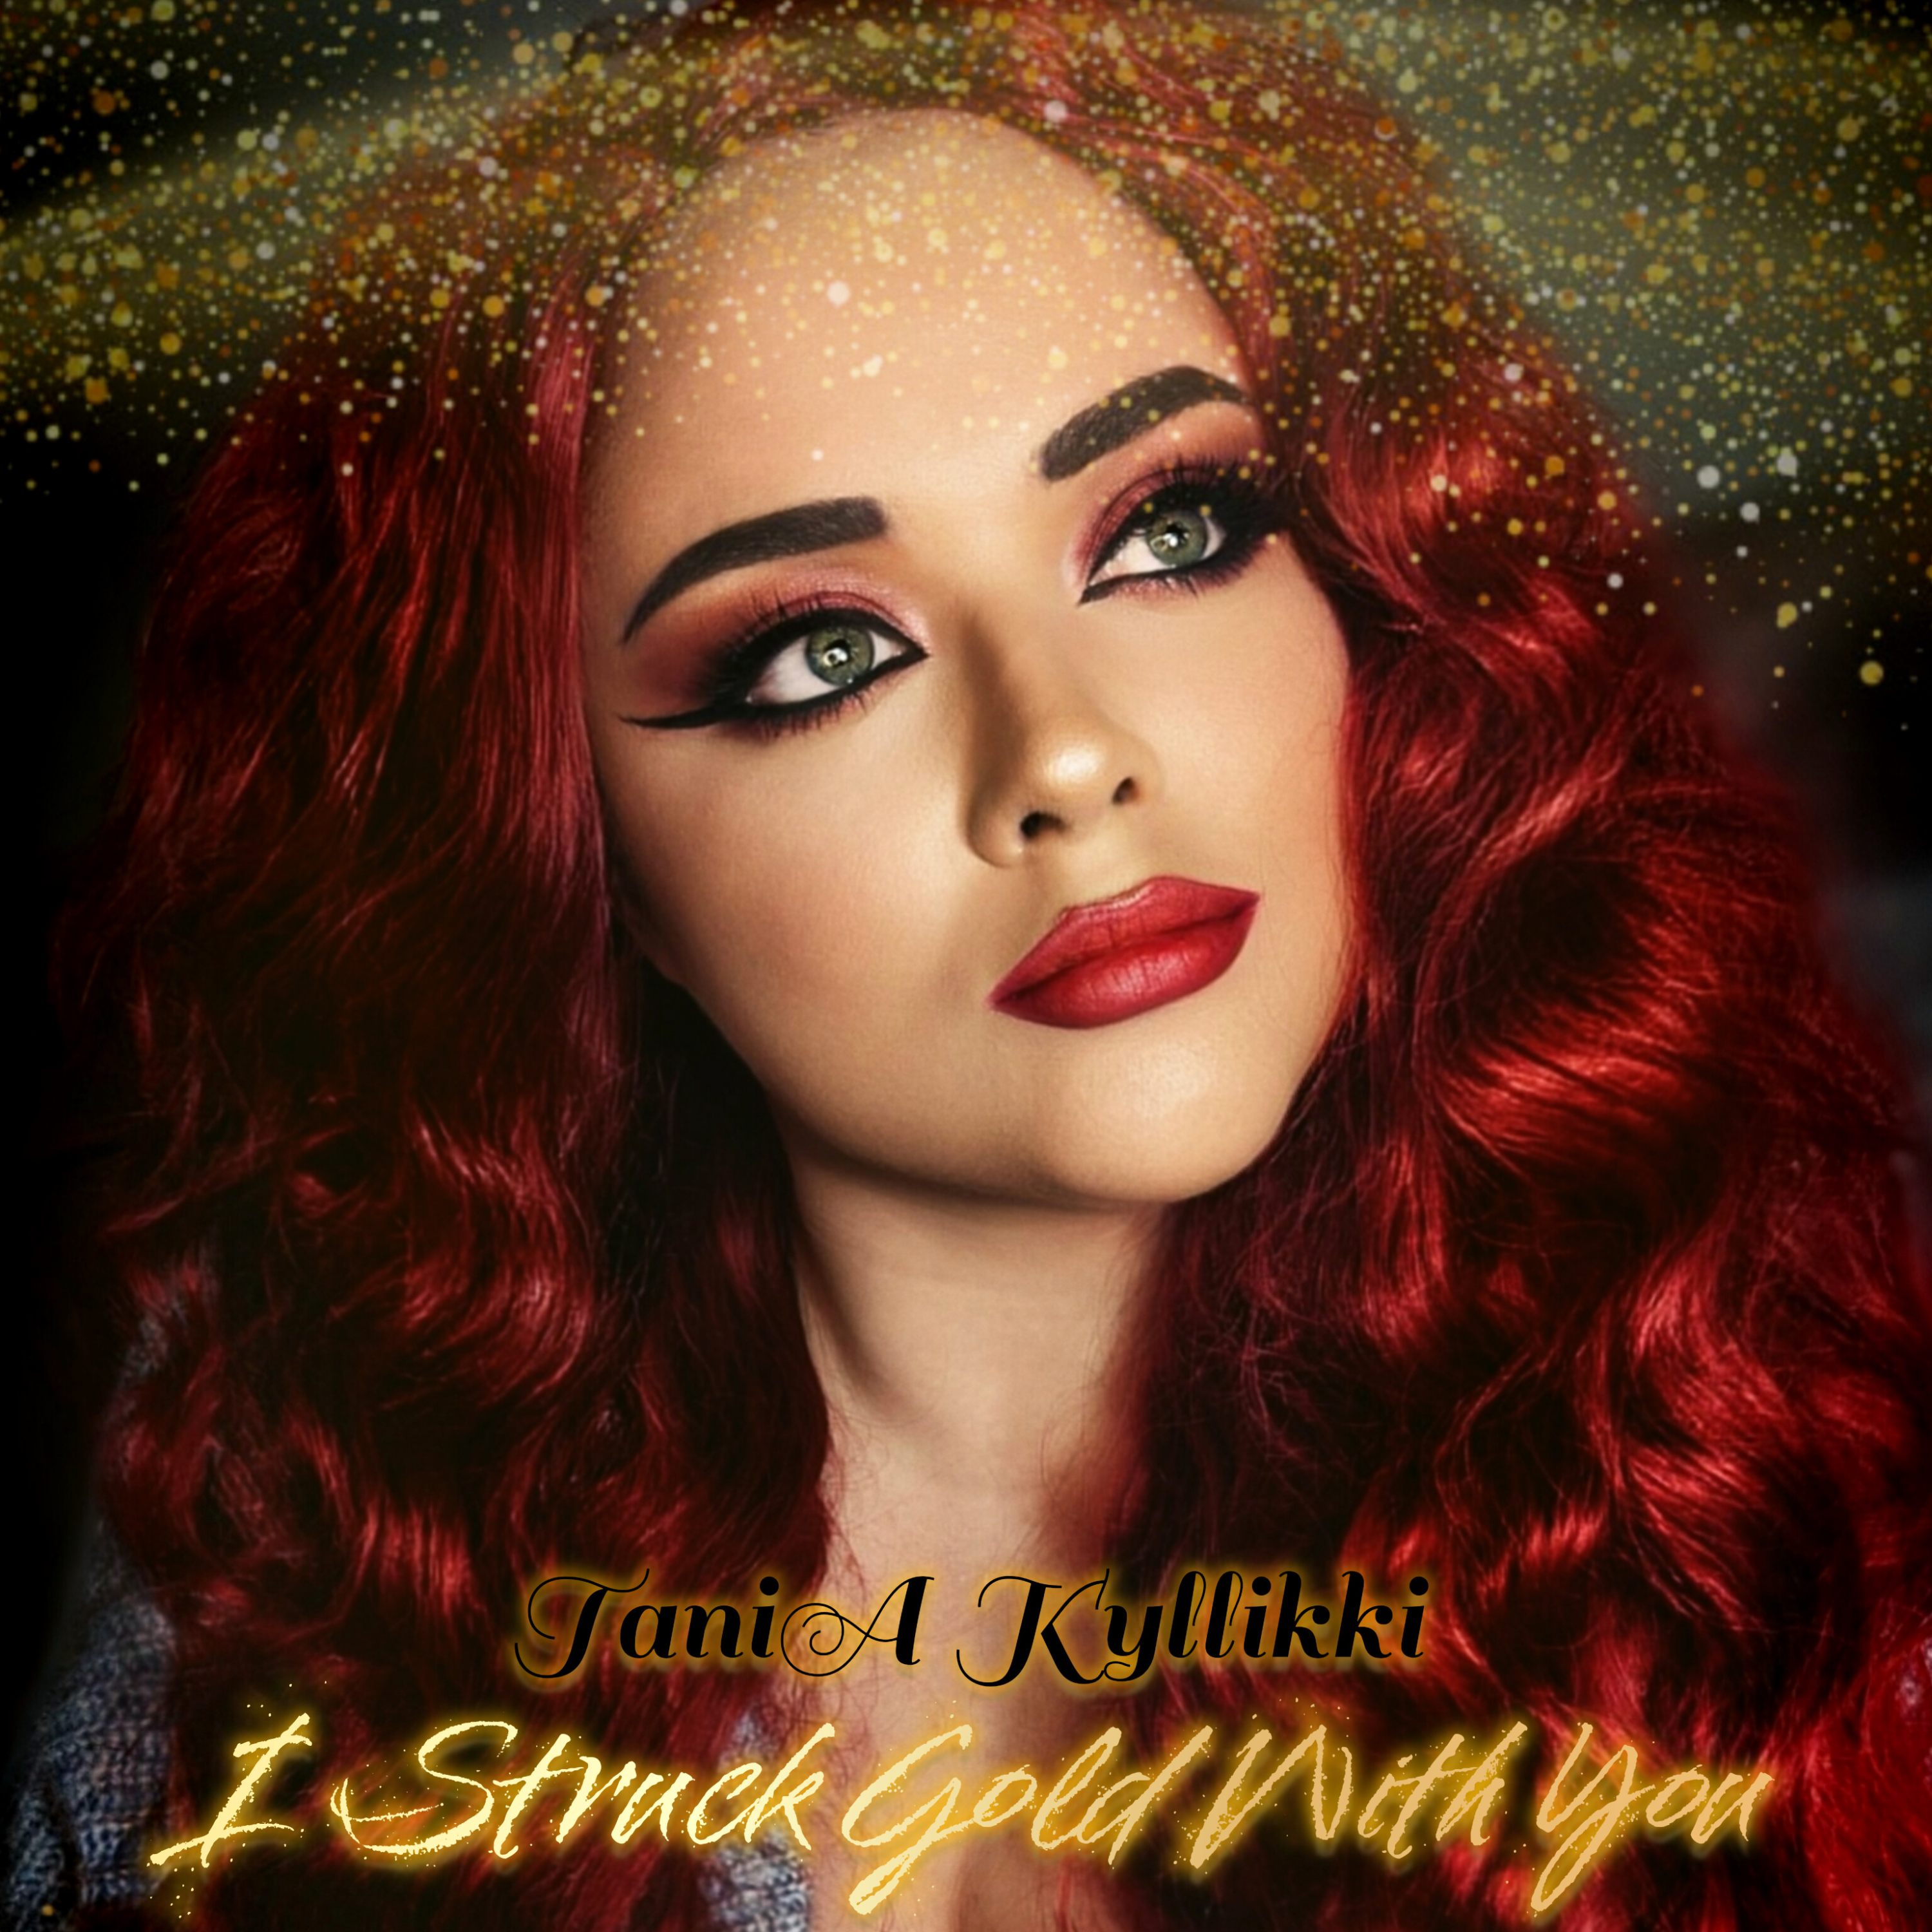 TaniA Kyllikki Captivates In “I Struck Gold With You”